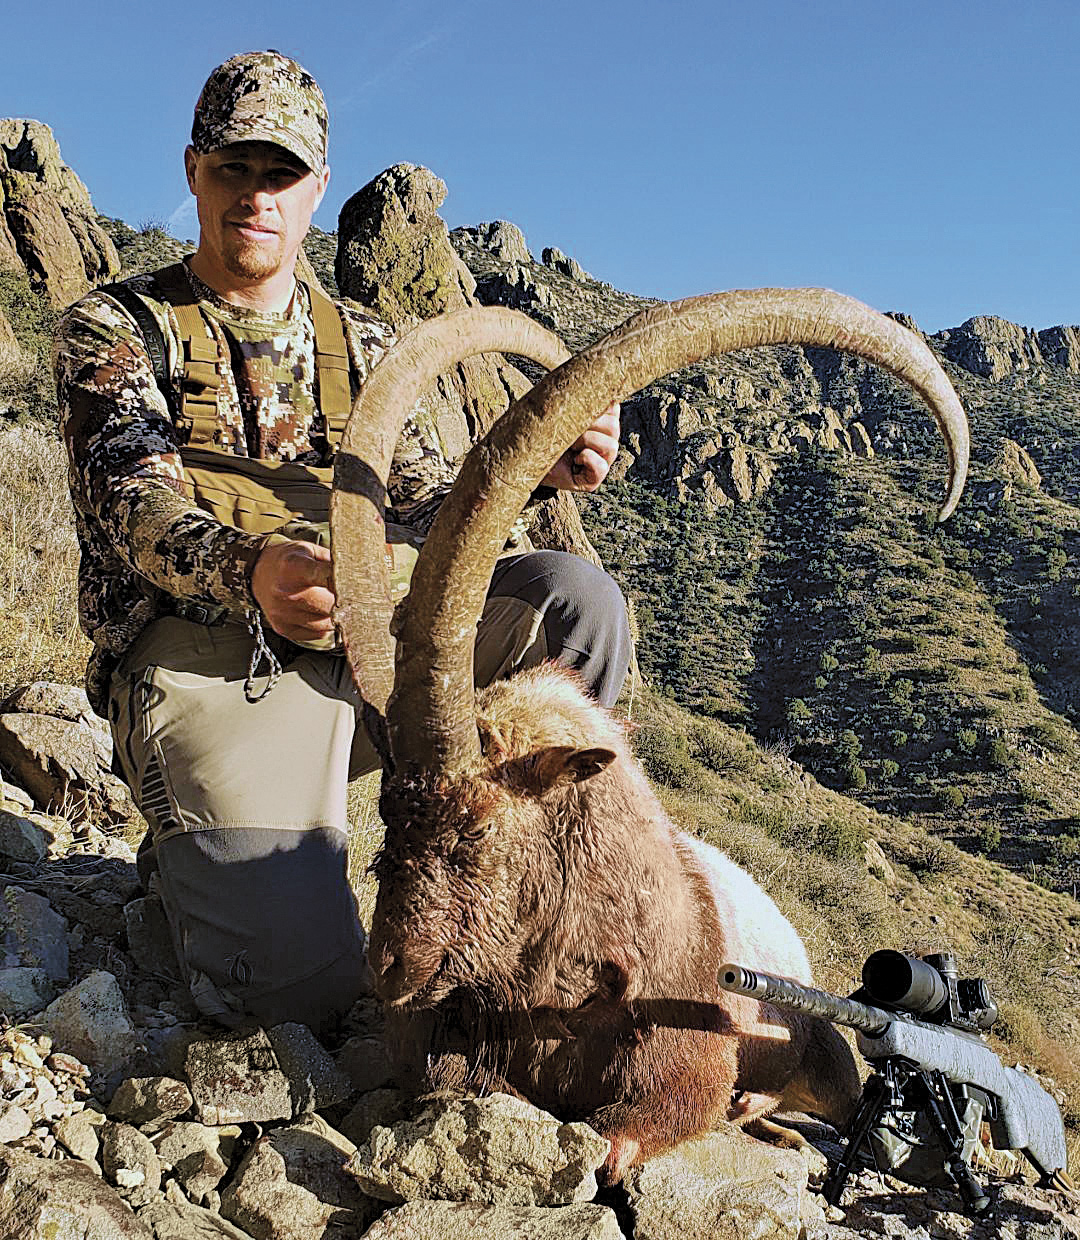 Jesse Greer with a great New Mexico Ibex from a previous exotic hunt.